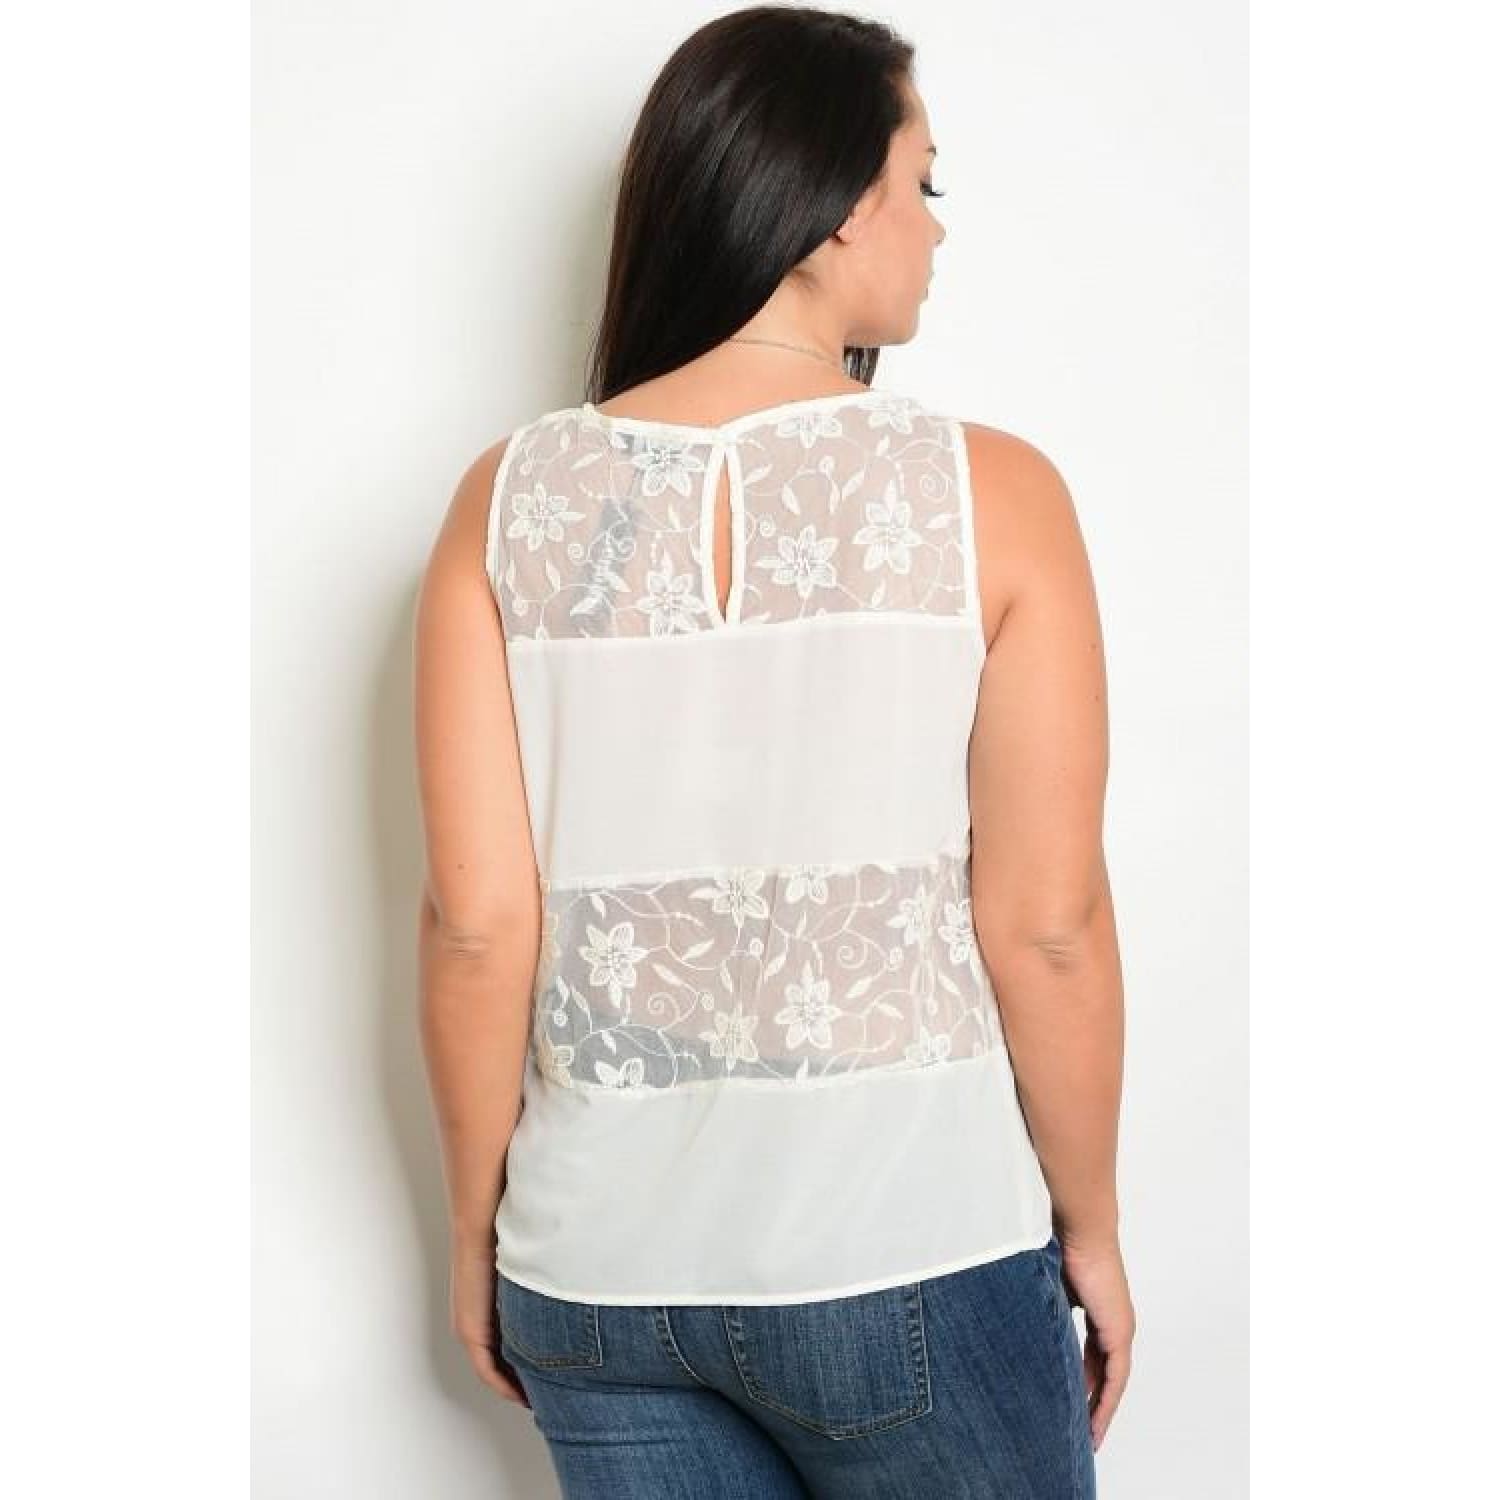 Creamy Beige Lace Top Size 14 - Best YOU by HTS